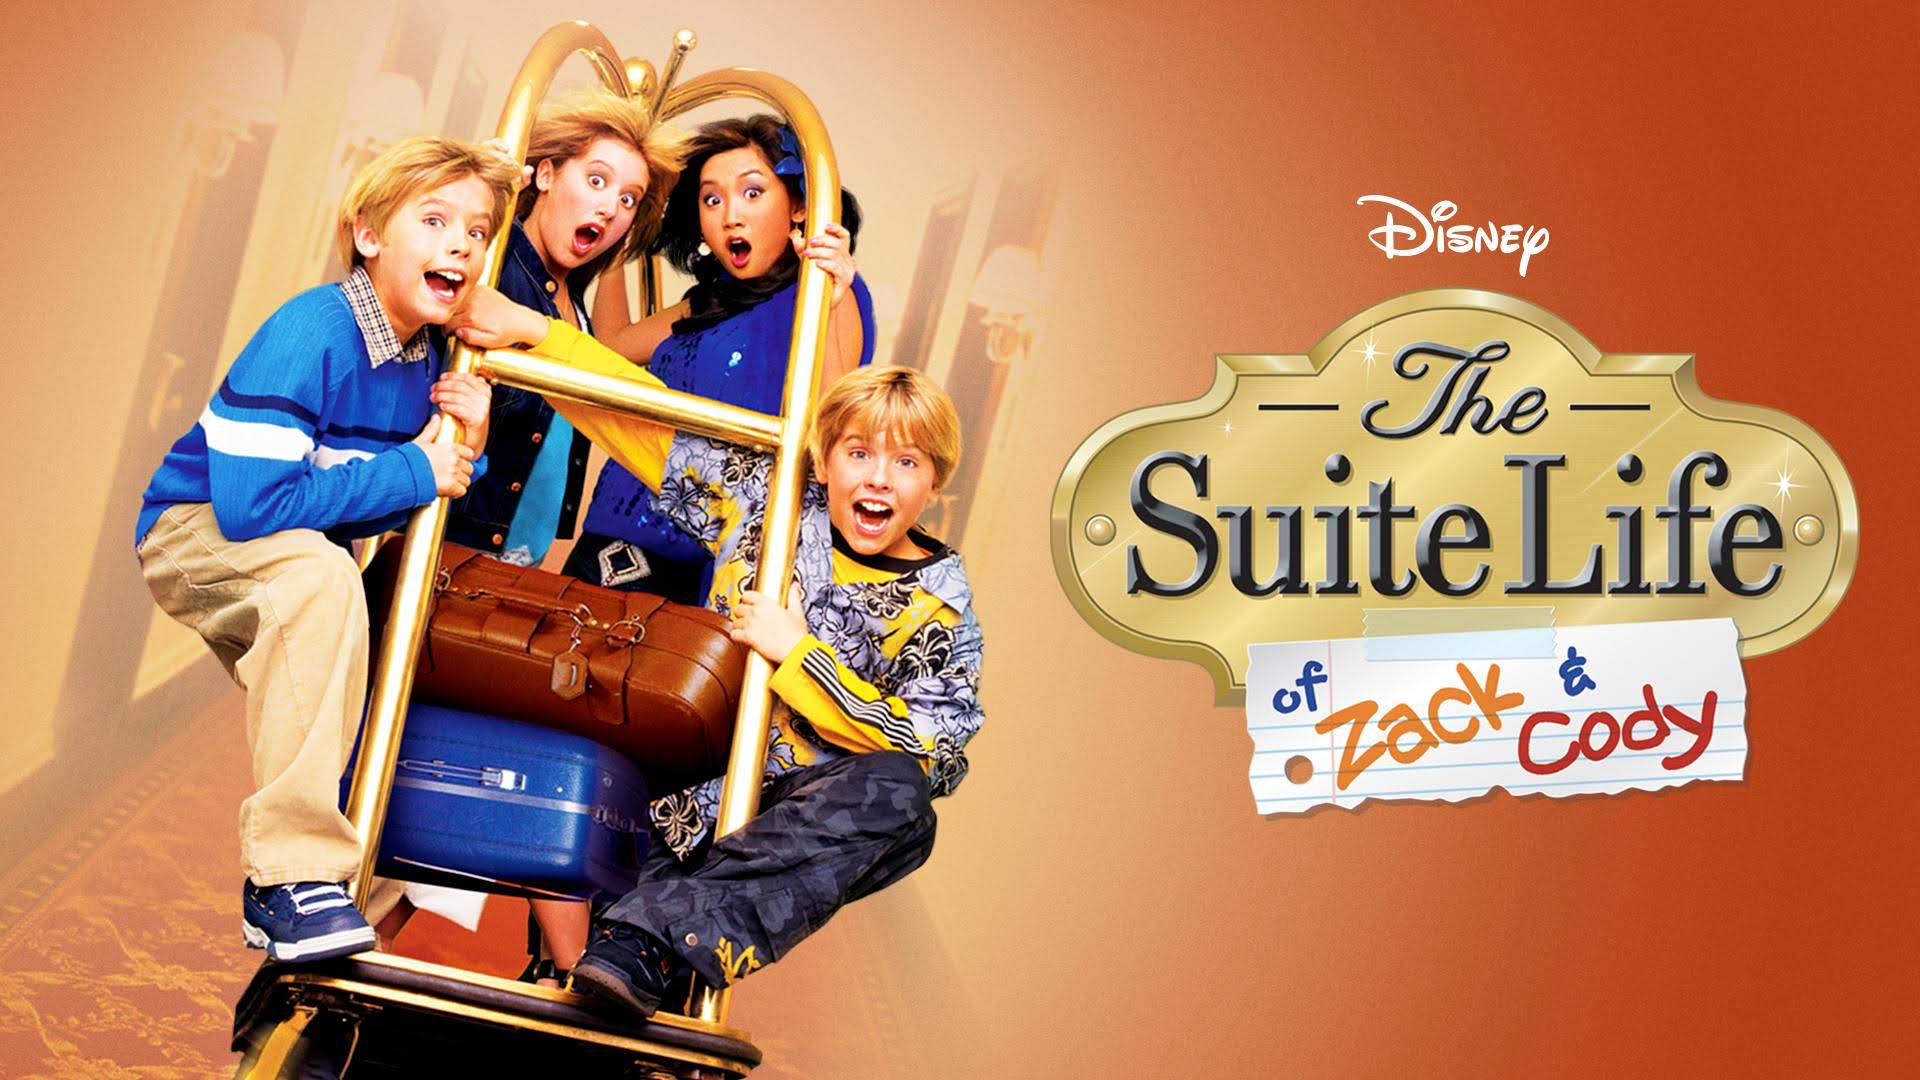 The Suite Life of Zack & Cody (2005)